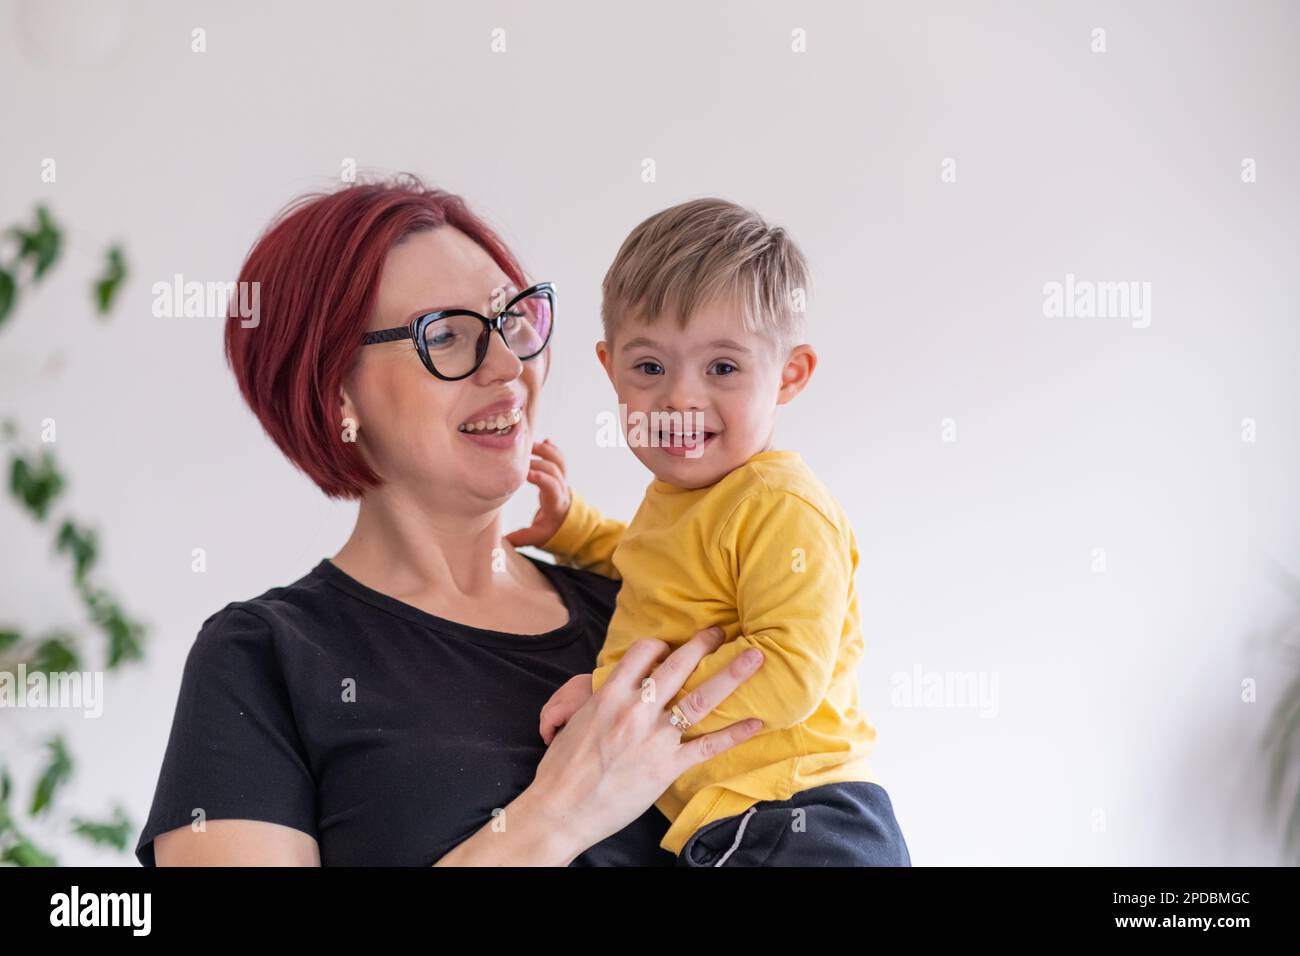 portrait of happy smiling mother and child living with down syndrome having fun. family moments. Stock Photo